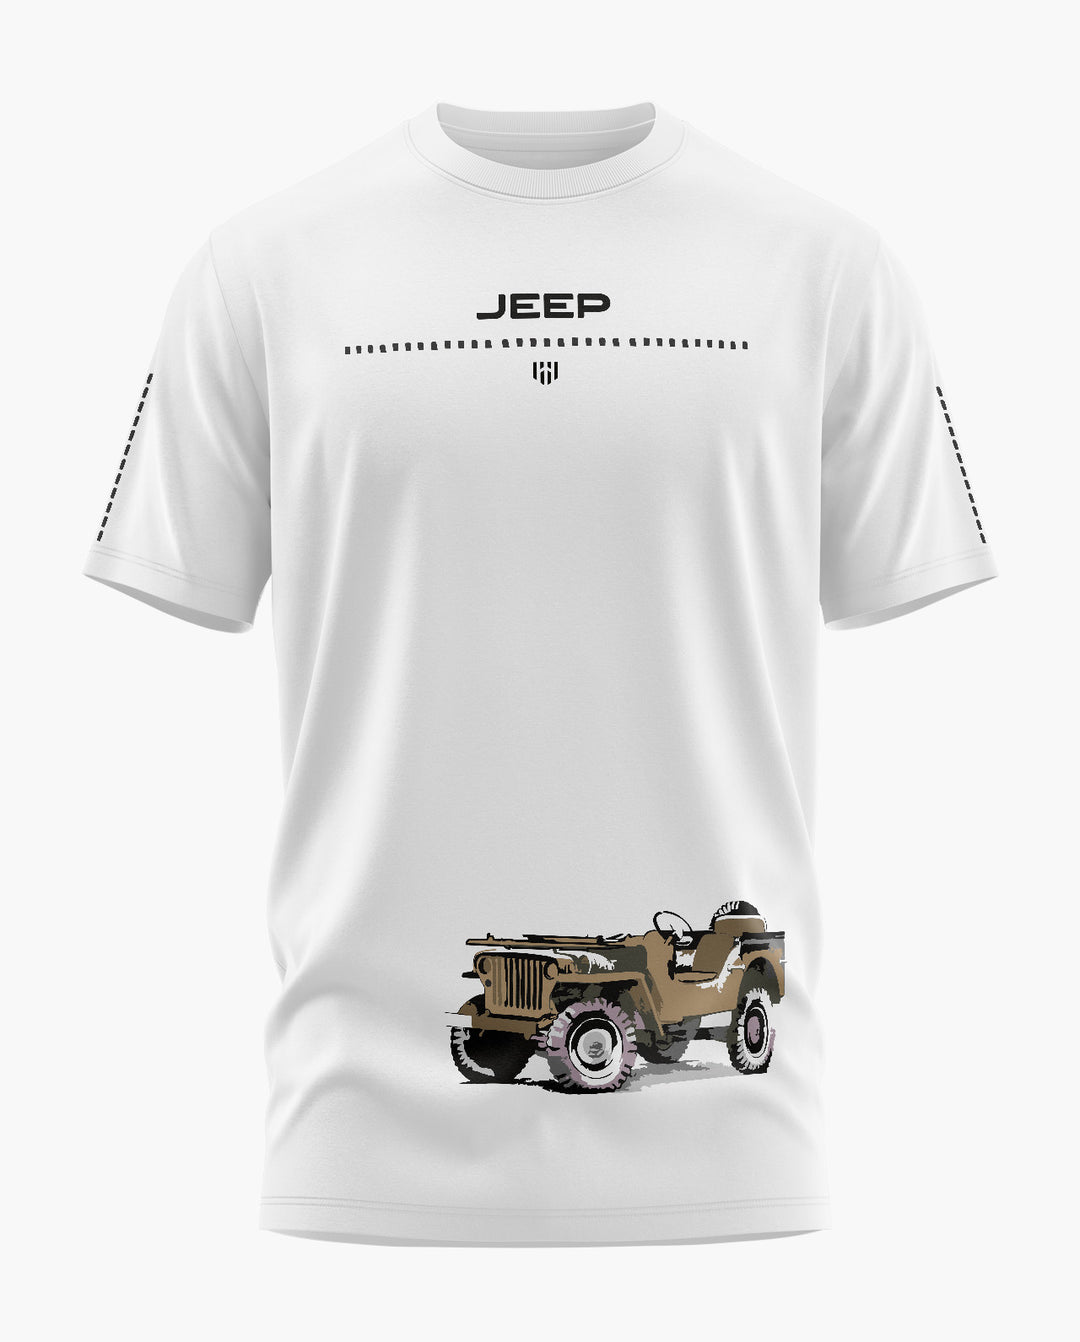 Willy's Jeep T-Shirt